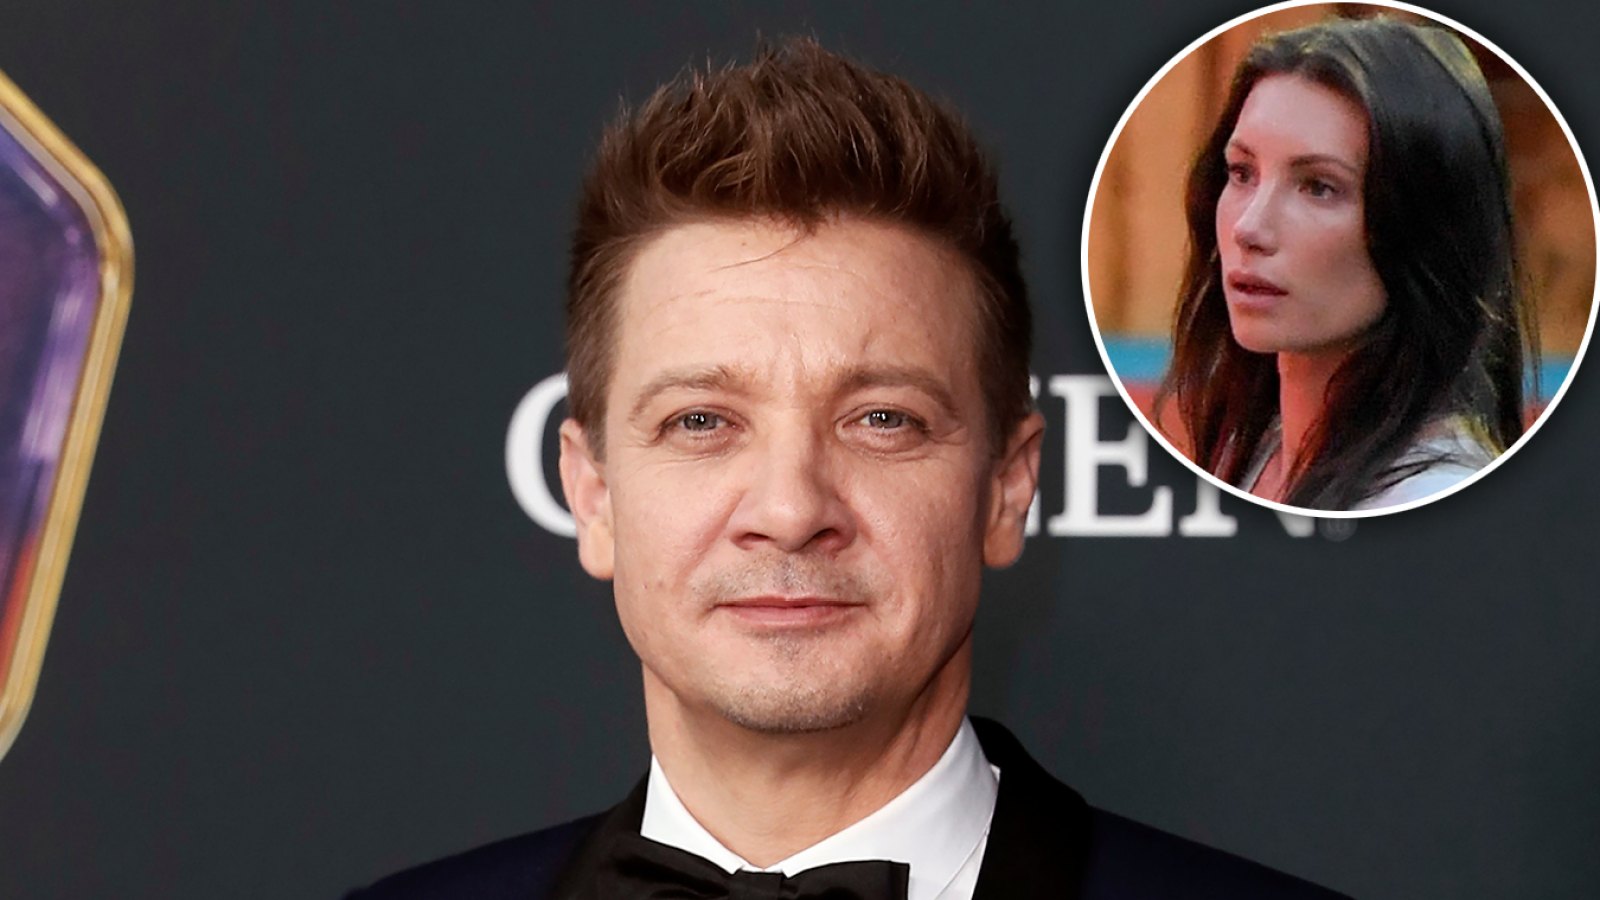 Jeremy Renner’s Ex-Wife Sonni Pacheco Slams His ‘Disheartening’ Request to Pay Less Child Support Amid Coronavirus